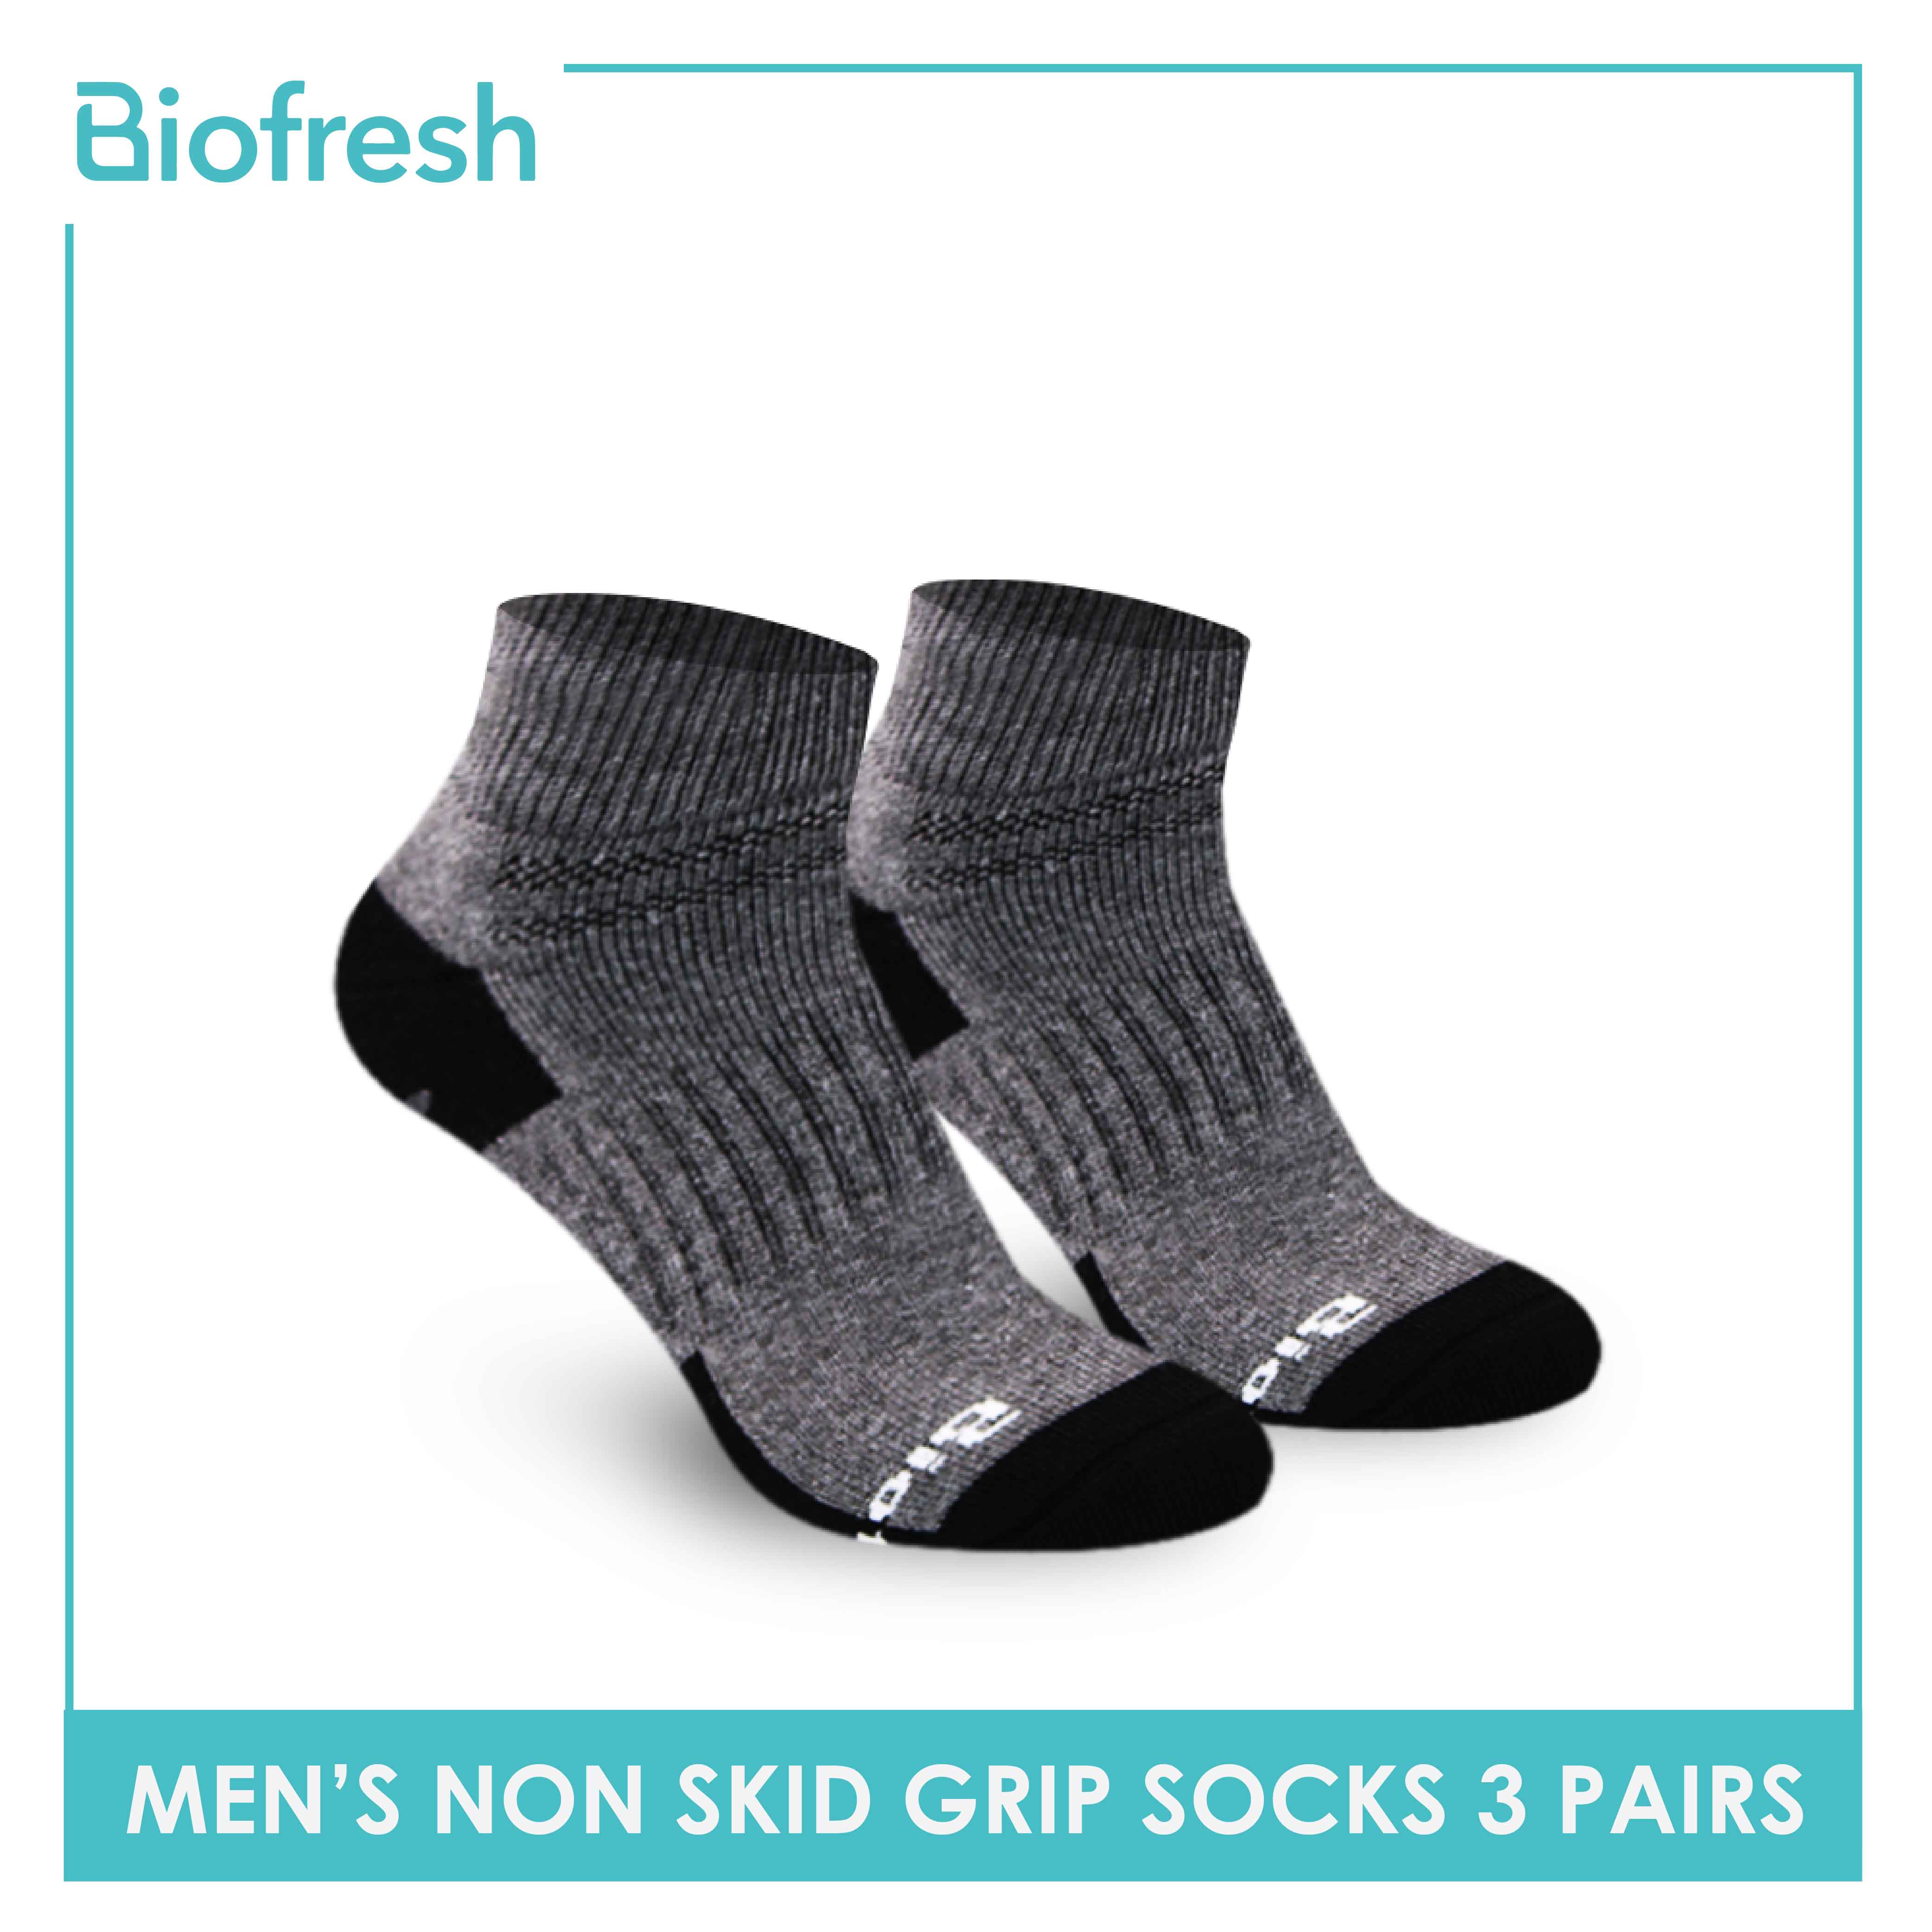 Biofresh Men's Antimicrobial Non Skid Grip Ankle Socks 3 pairs in a ...